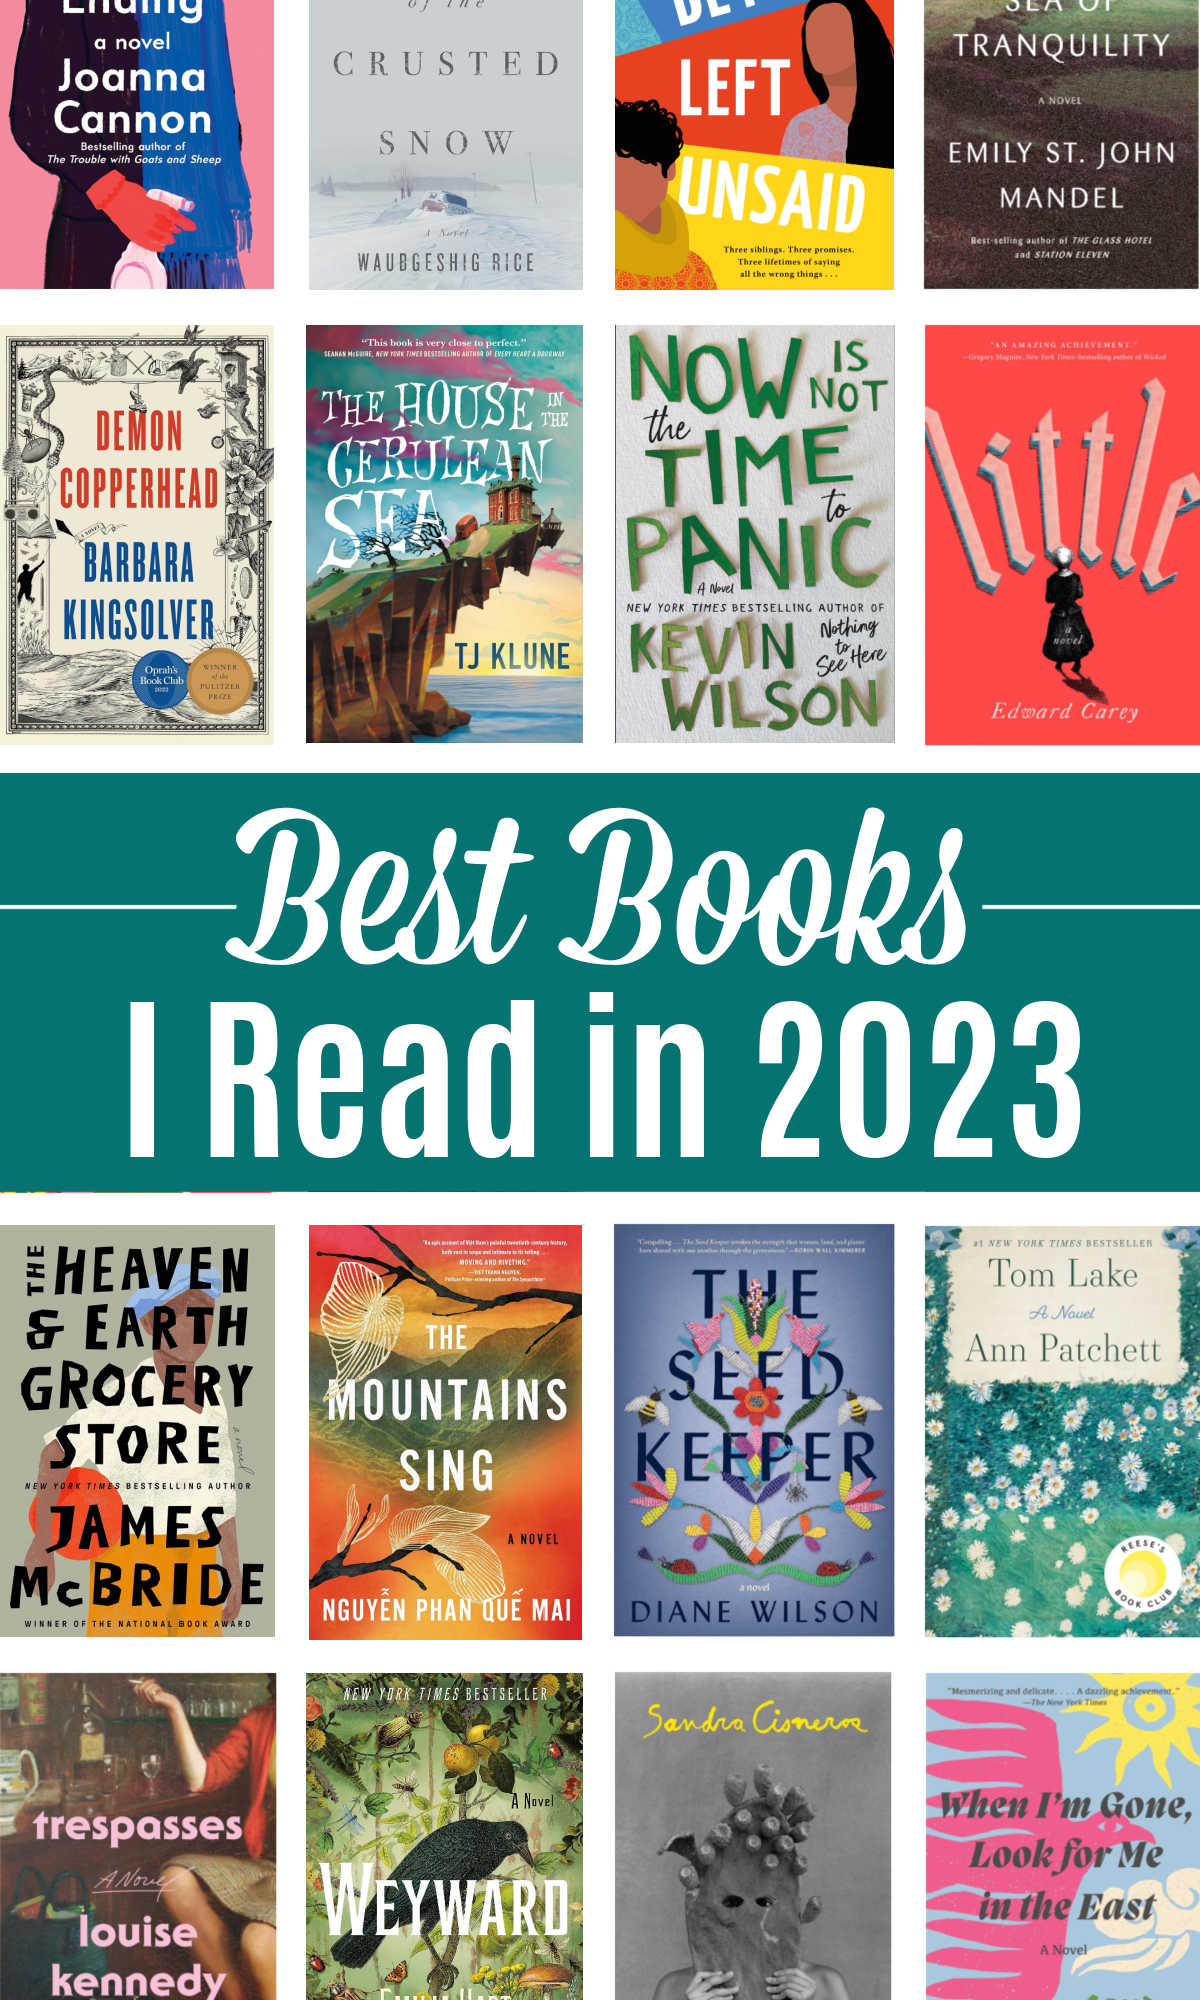 My Favorite Books from 2023